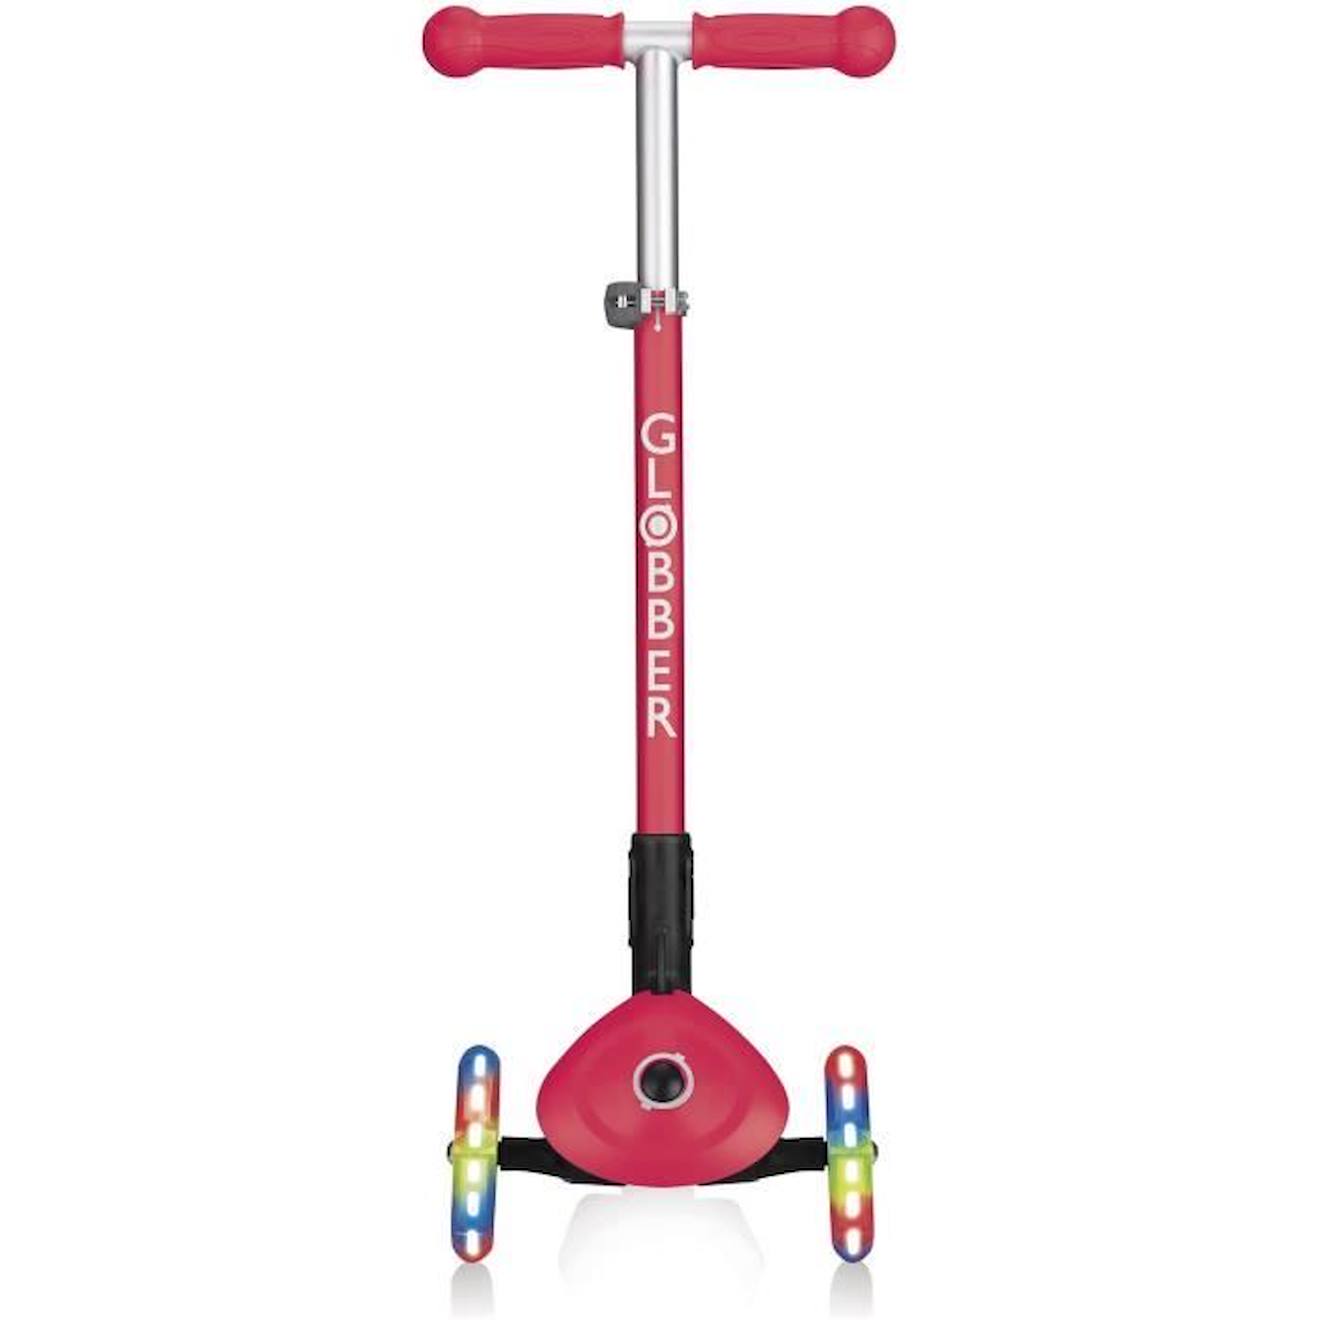 Ludendo - Trottinette 3 roues pliable Globber rouge - Tricycle